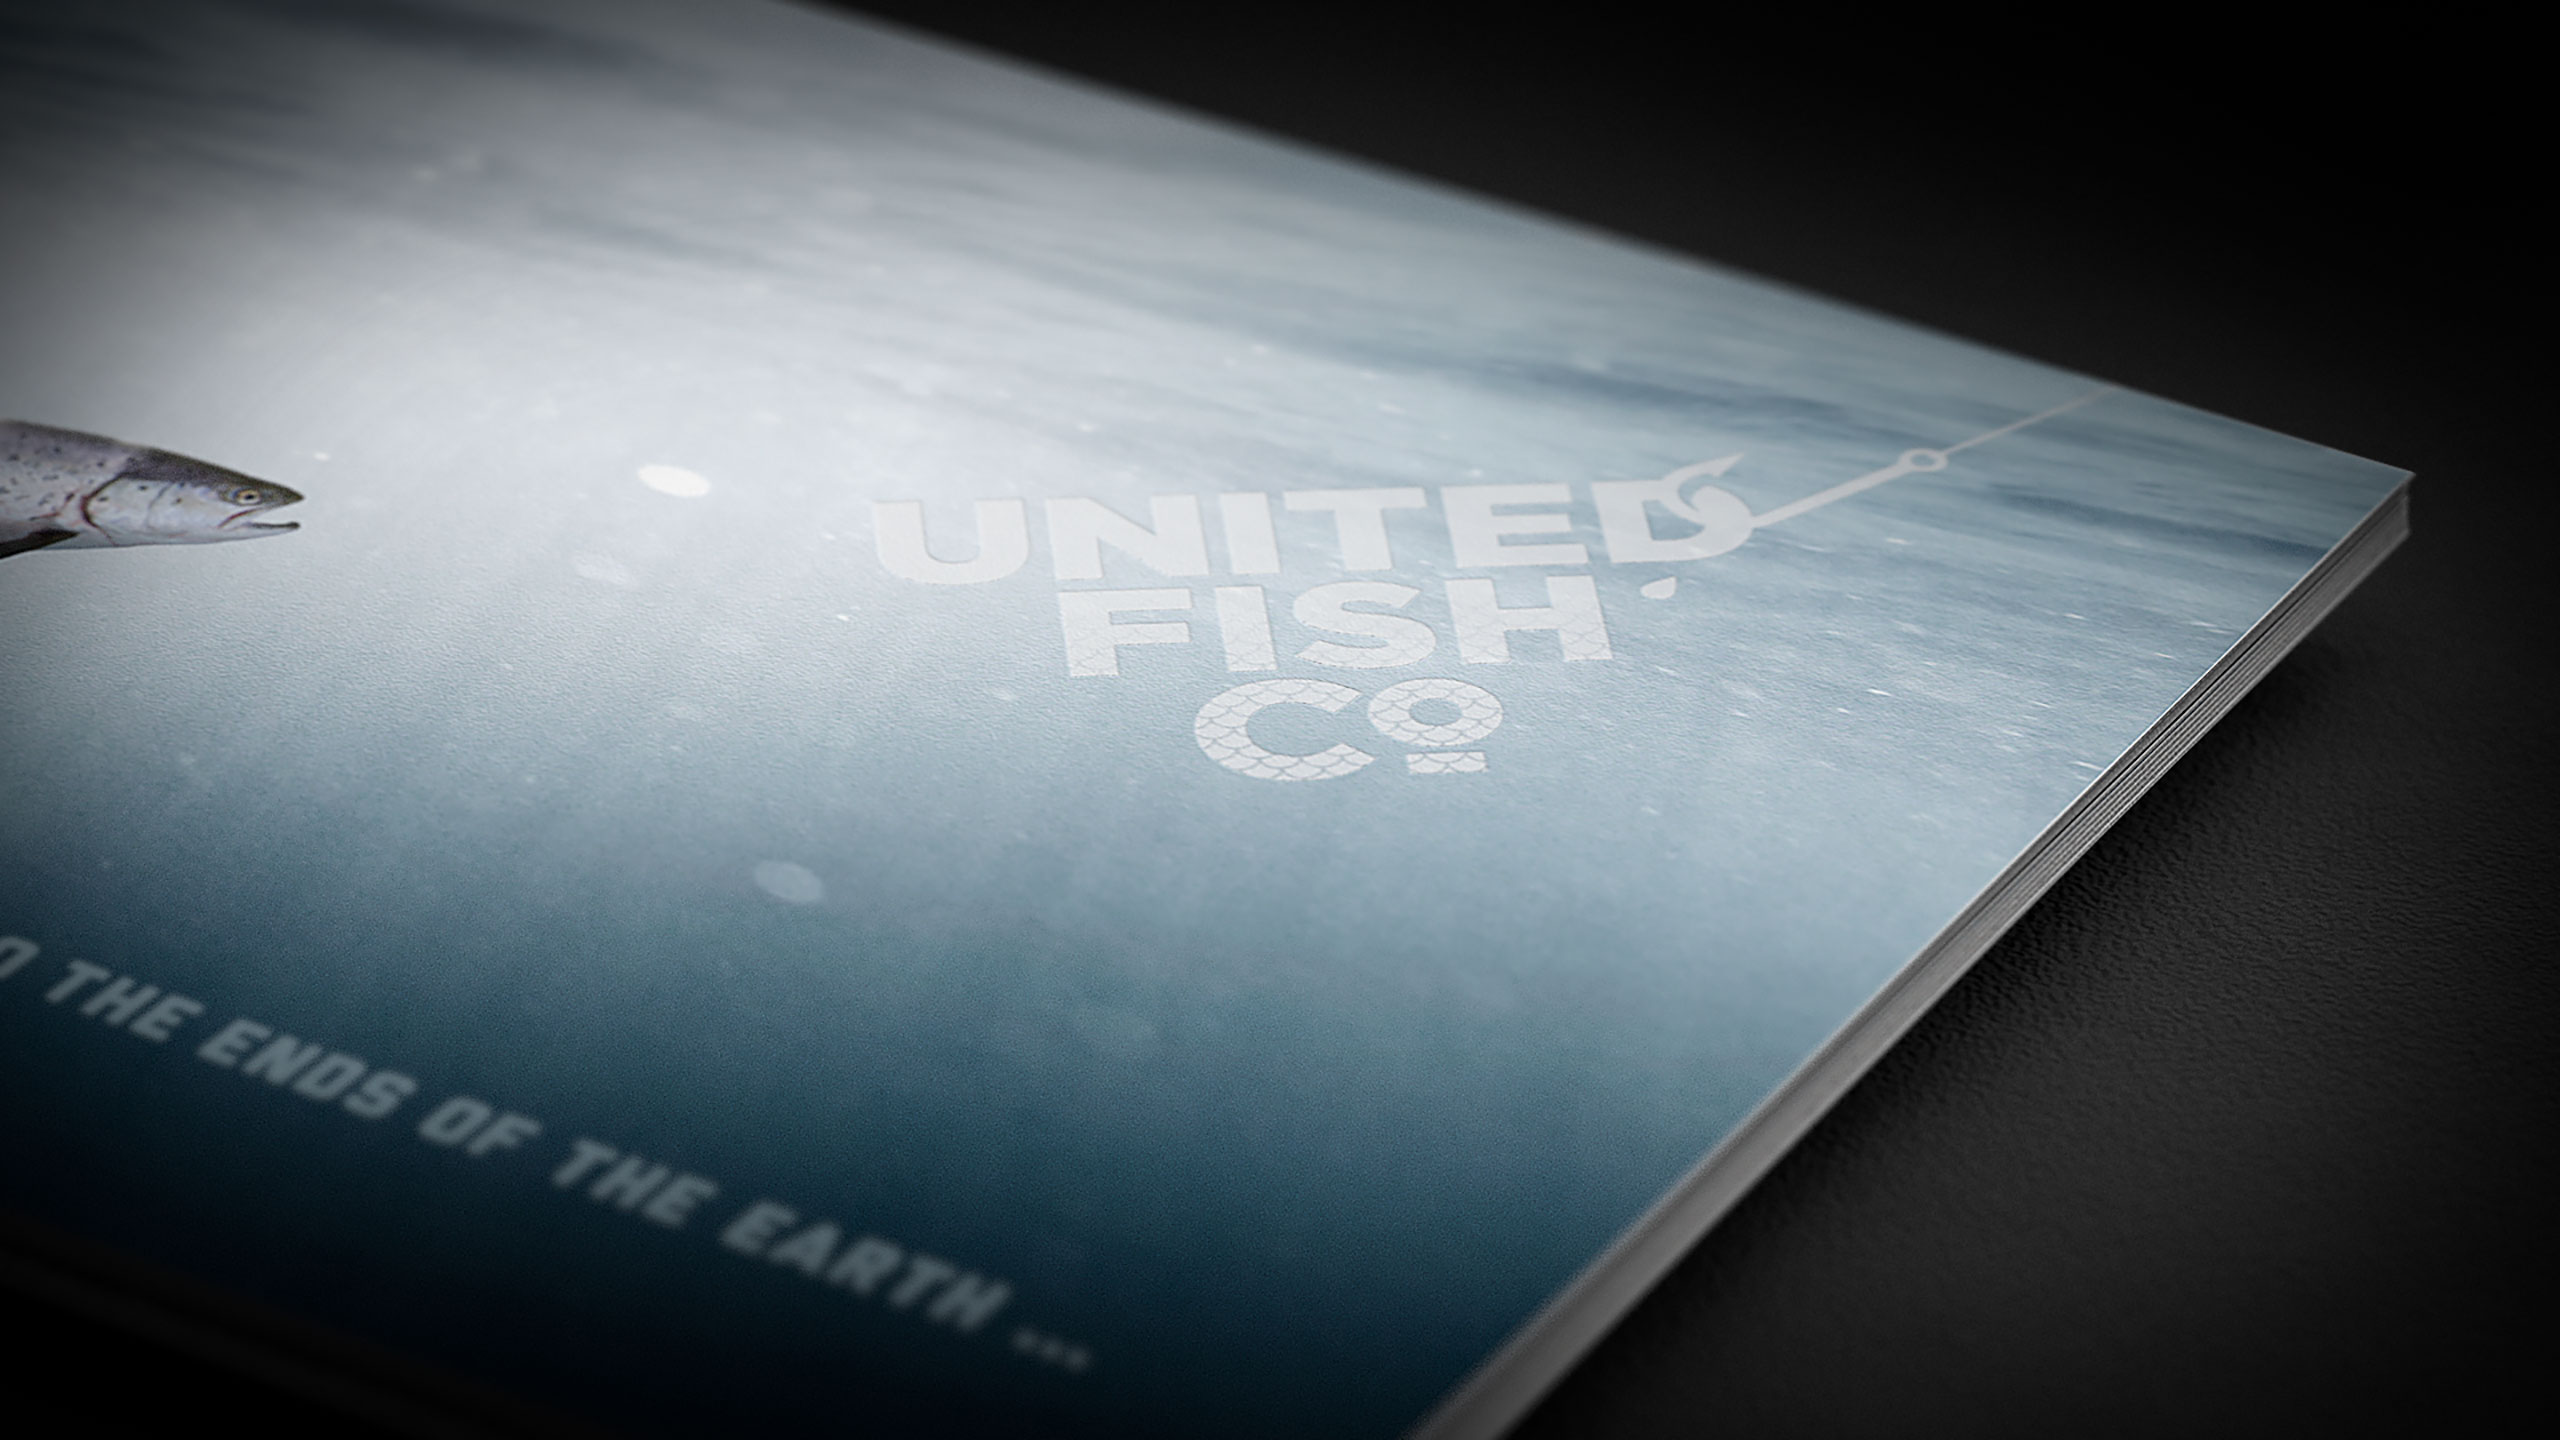 Tried-and-True-Design-Auckland-United-Fish-Co-rebrand-Brochure-Cover